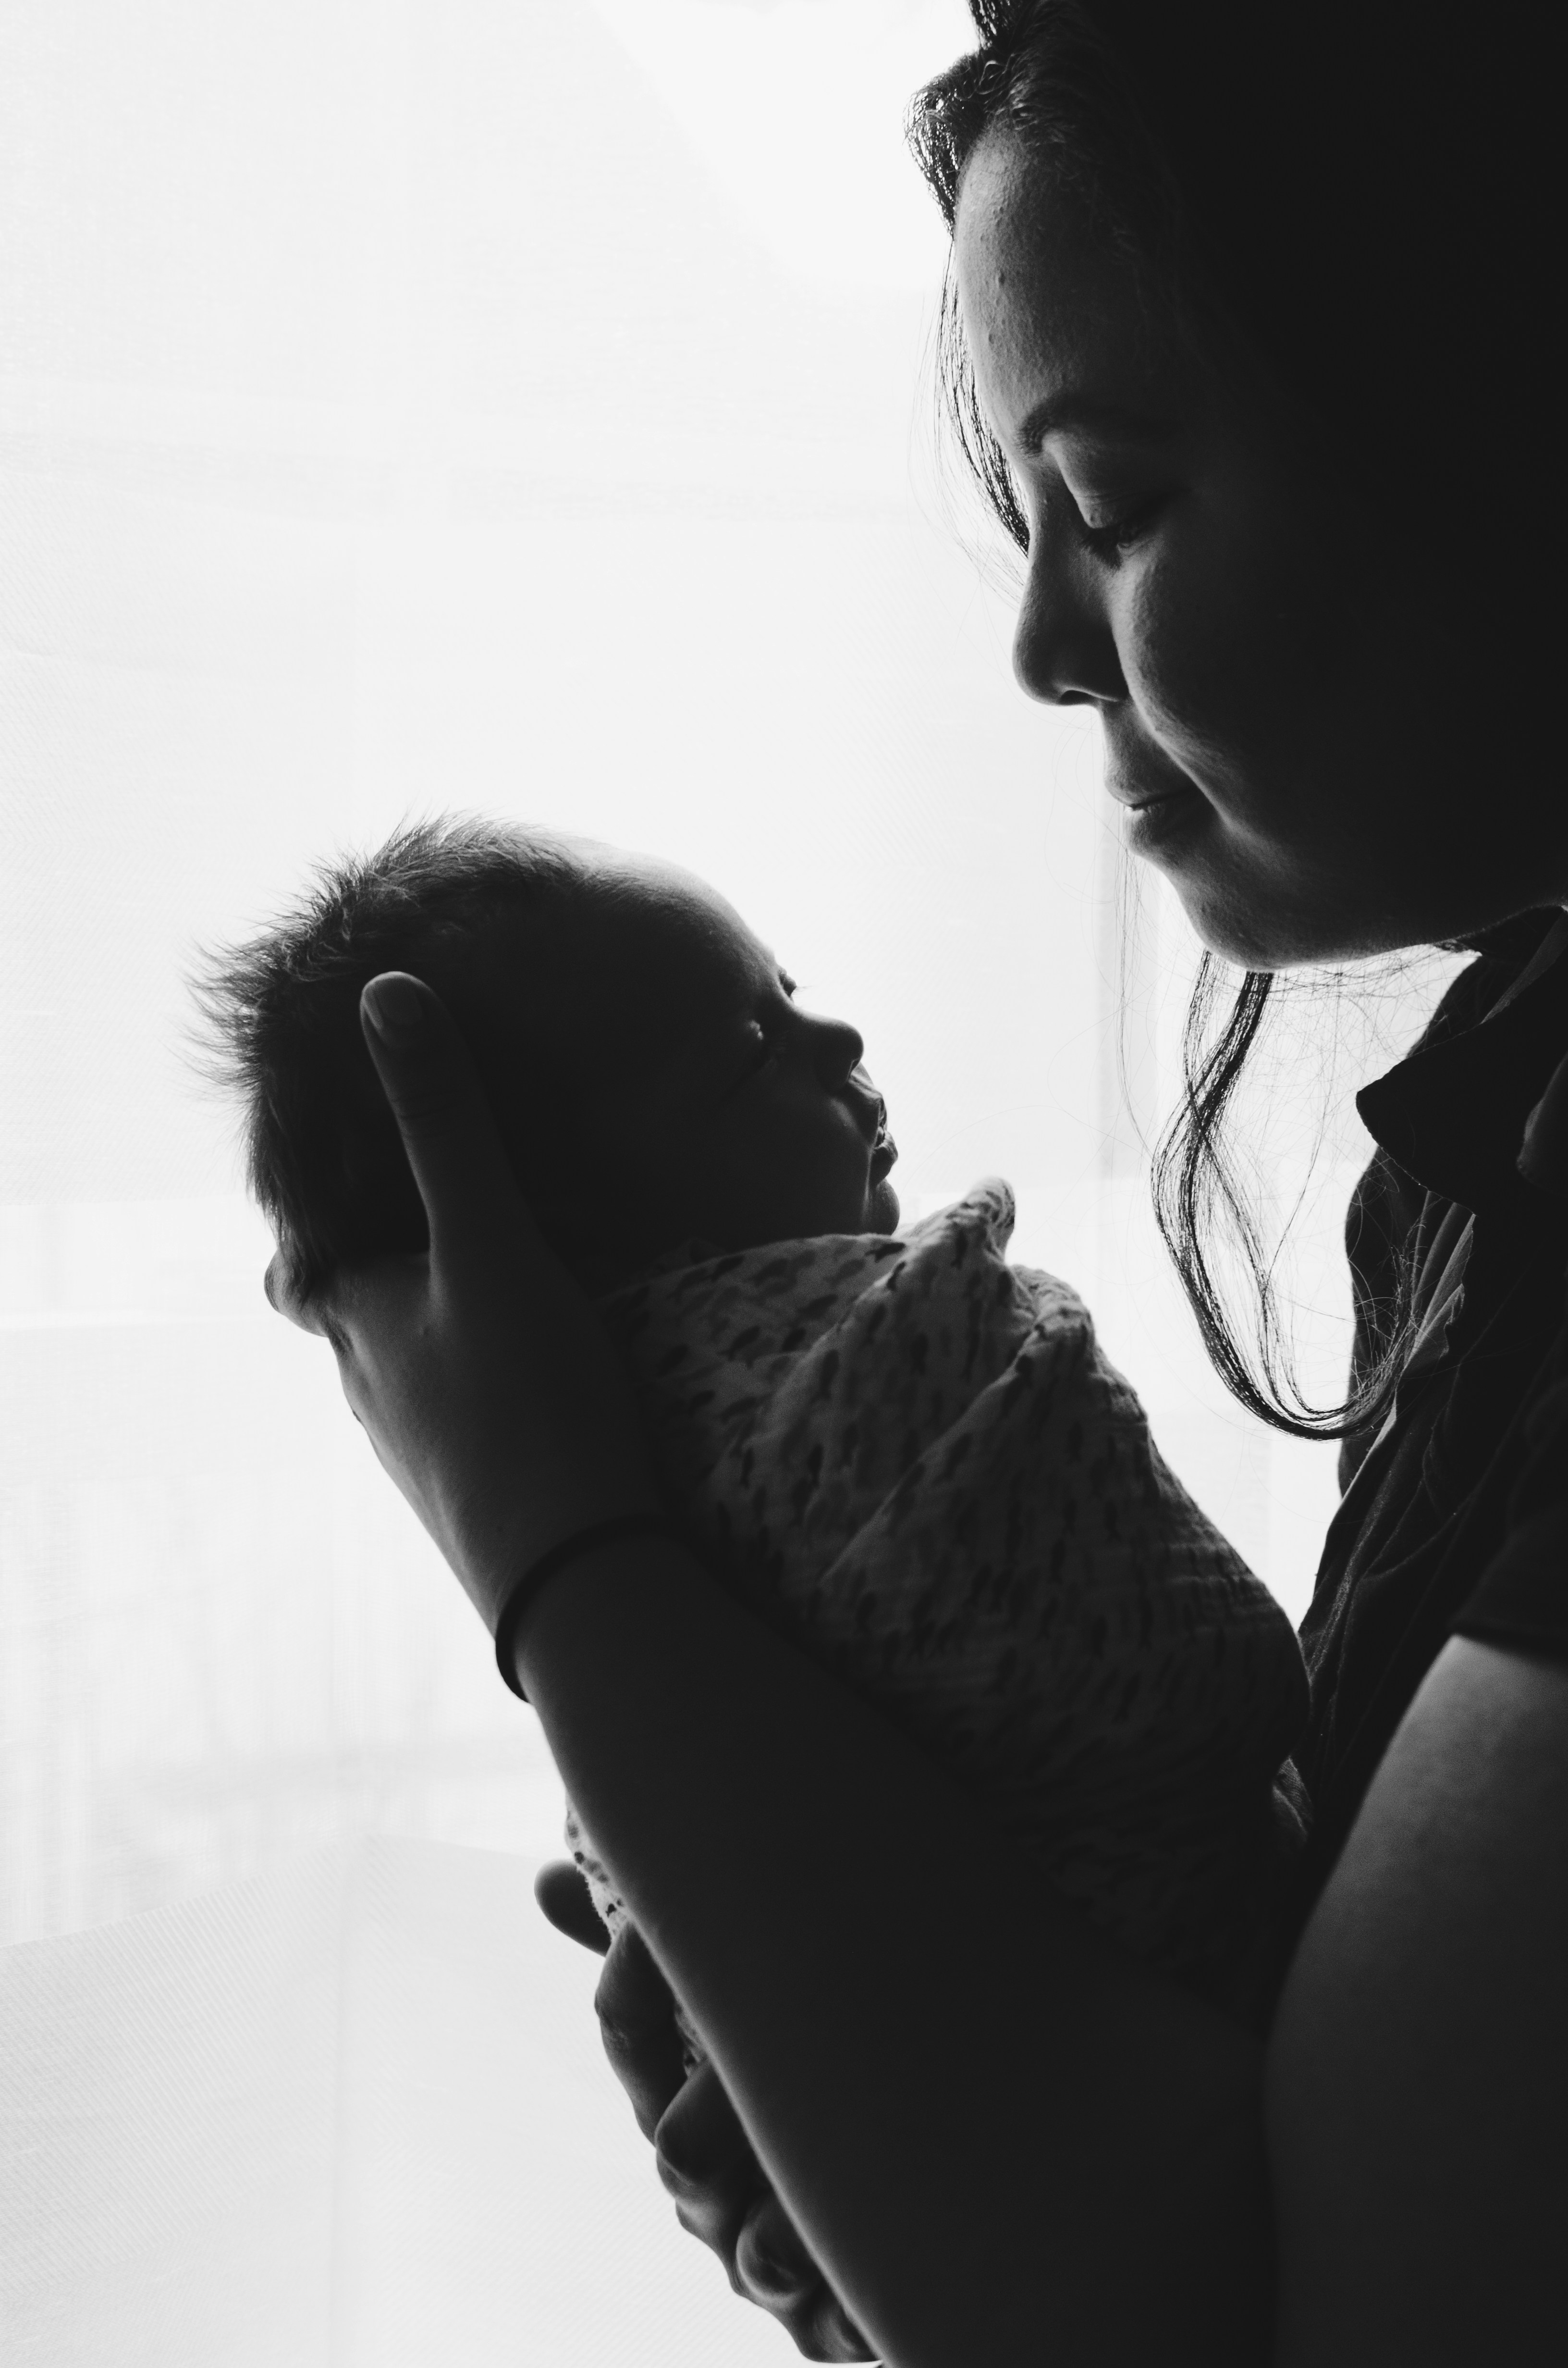 Choose from a curated selection of baby photos. Always free on Unsplash.